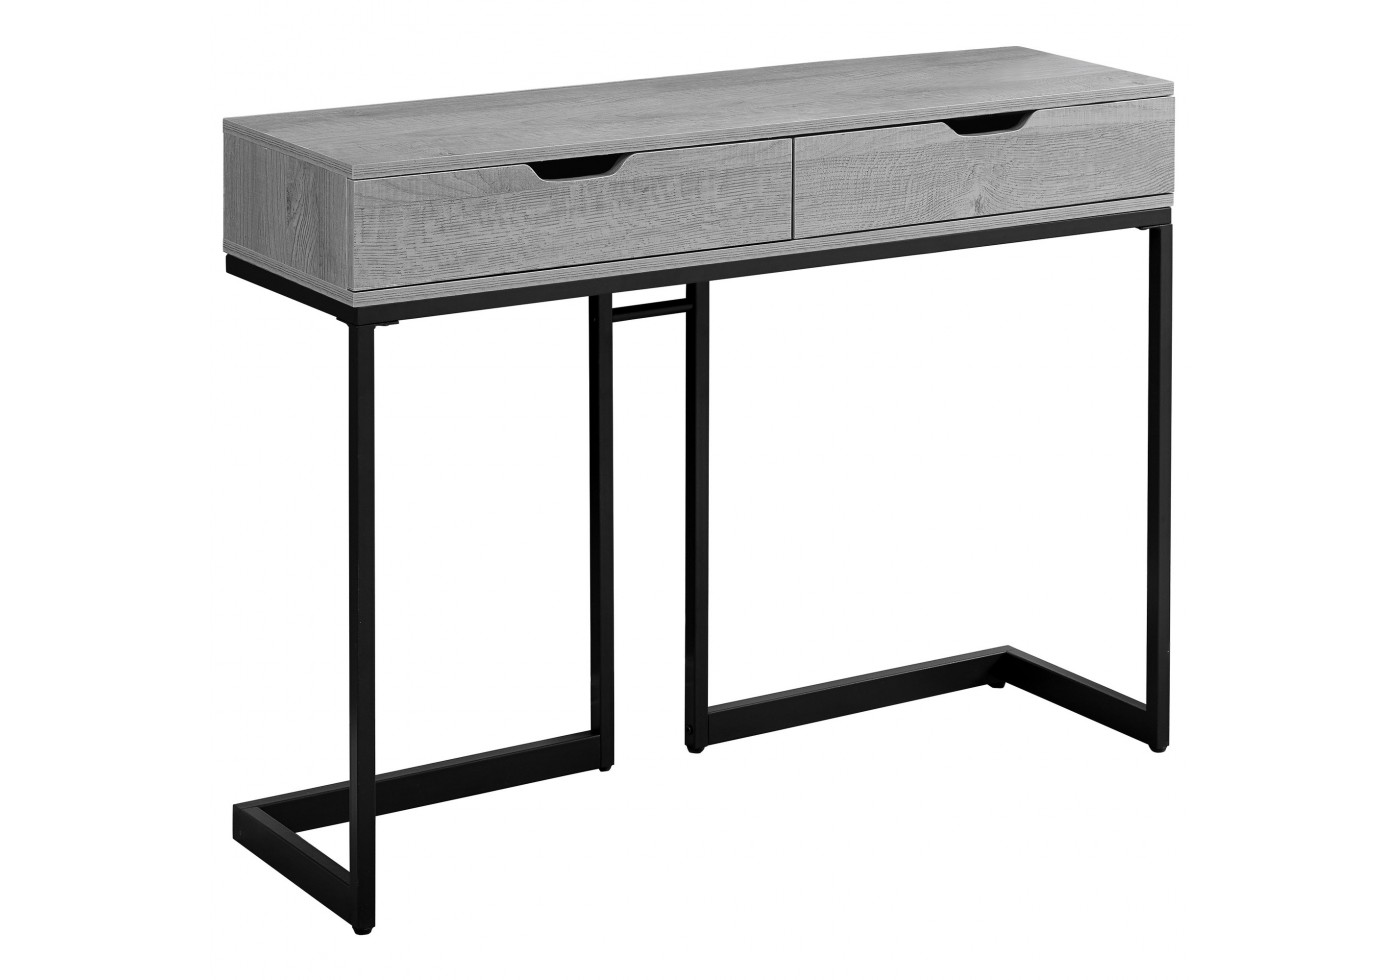 accent table grey black metal hall console pottery barn like dining bedroom furniture teak wood target cabinet ikea white top wine rack and gray end tables replacement legs patio